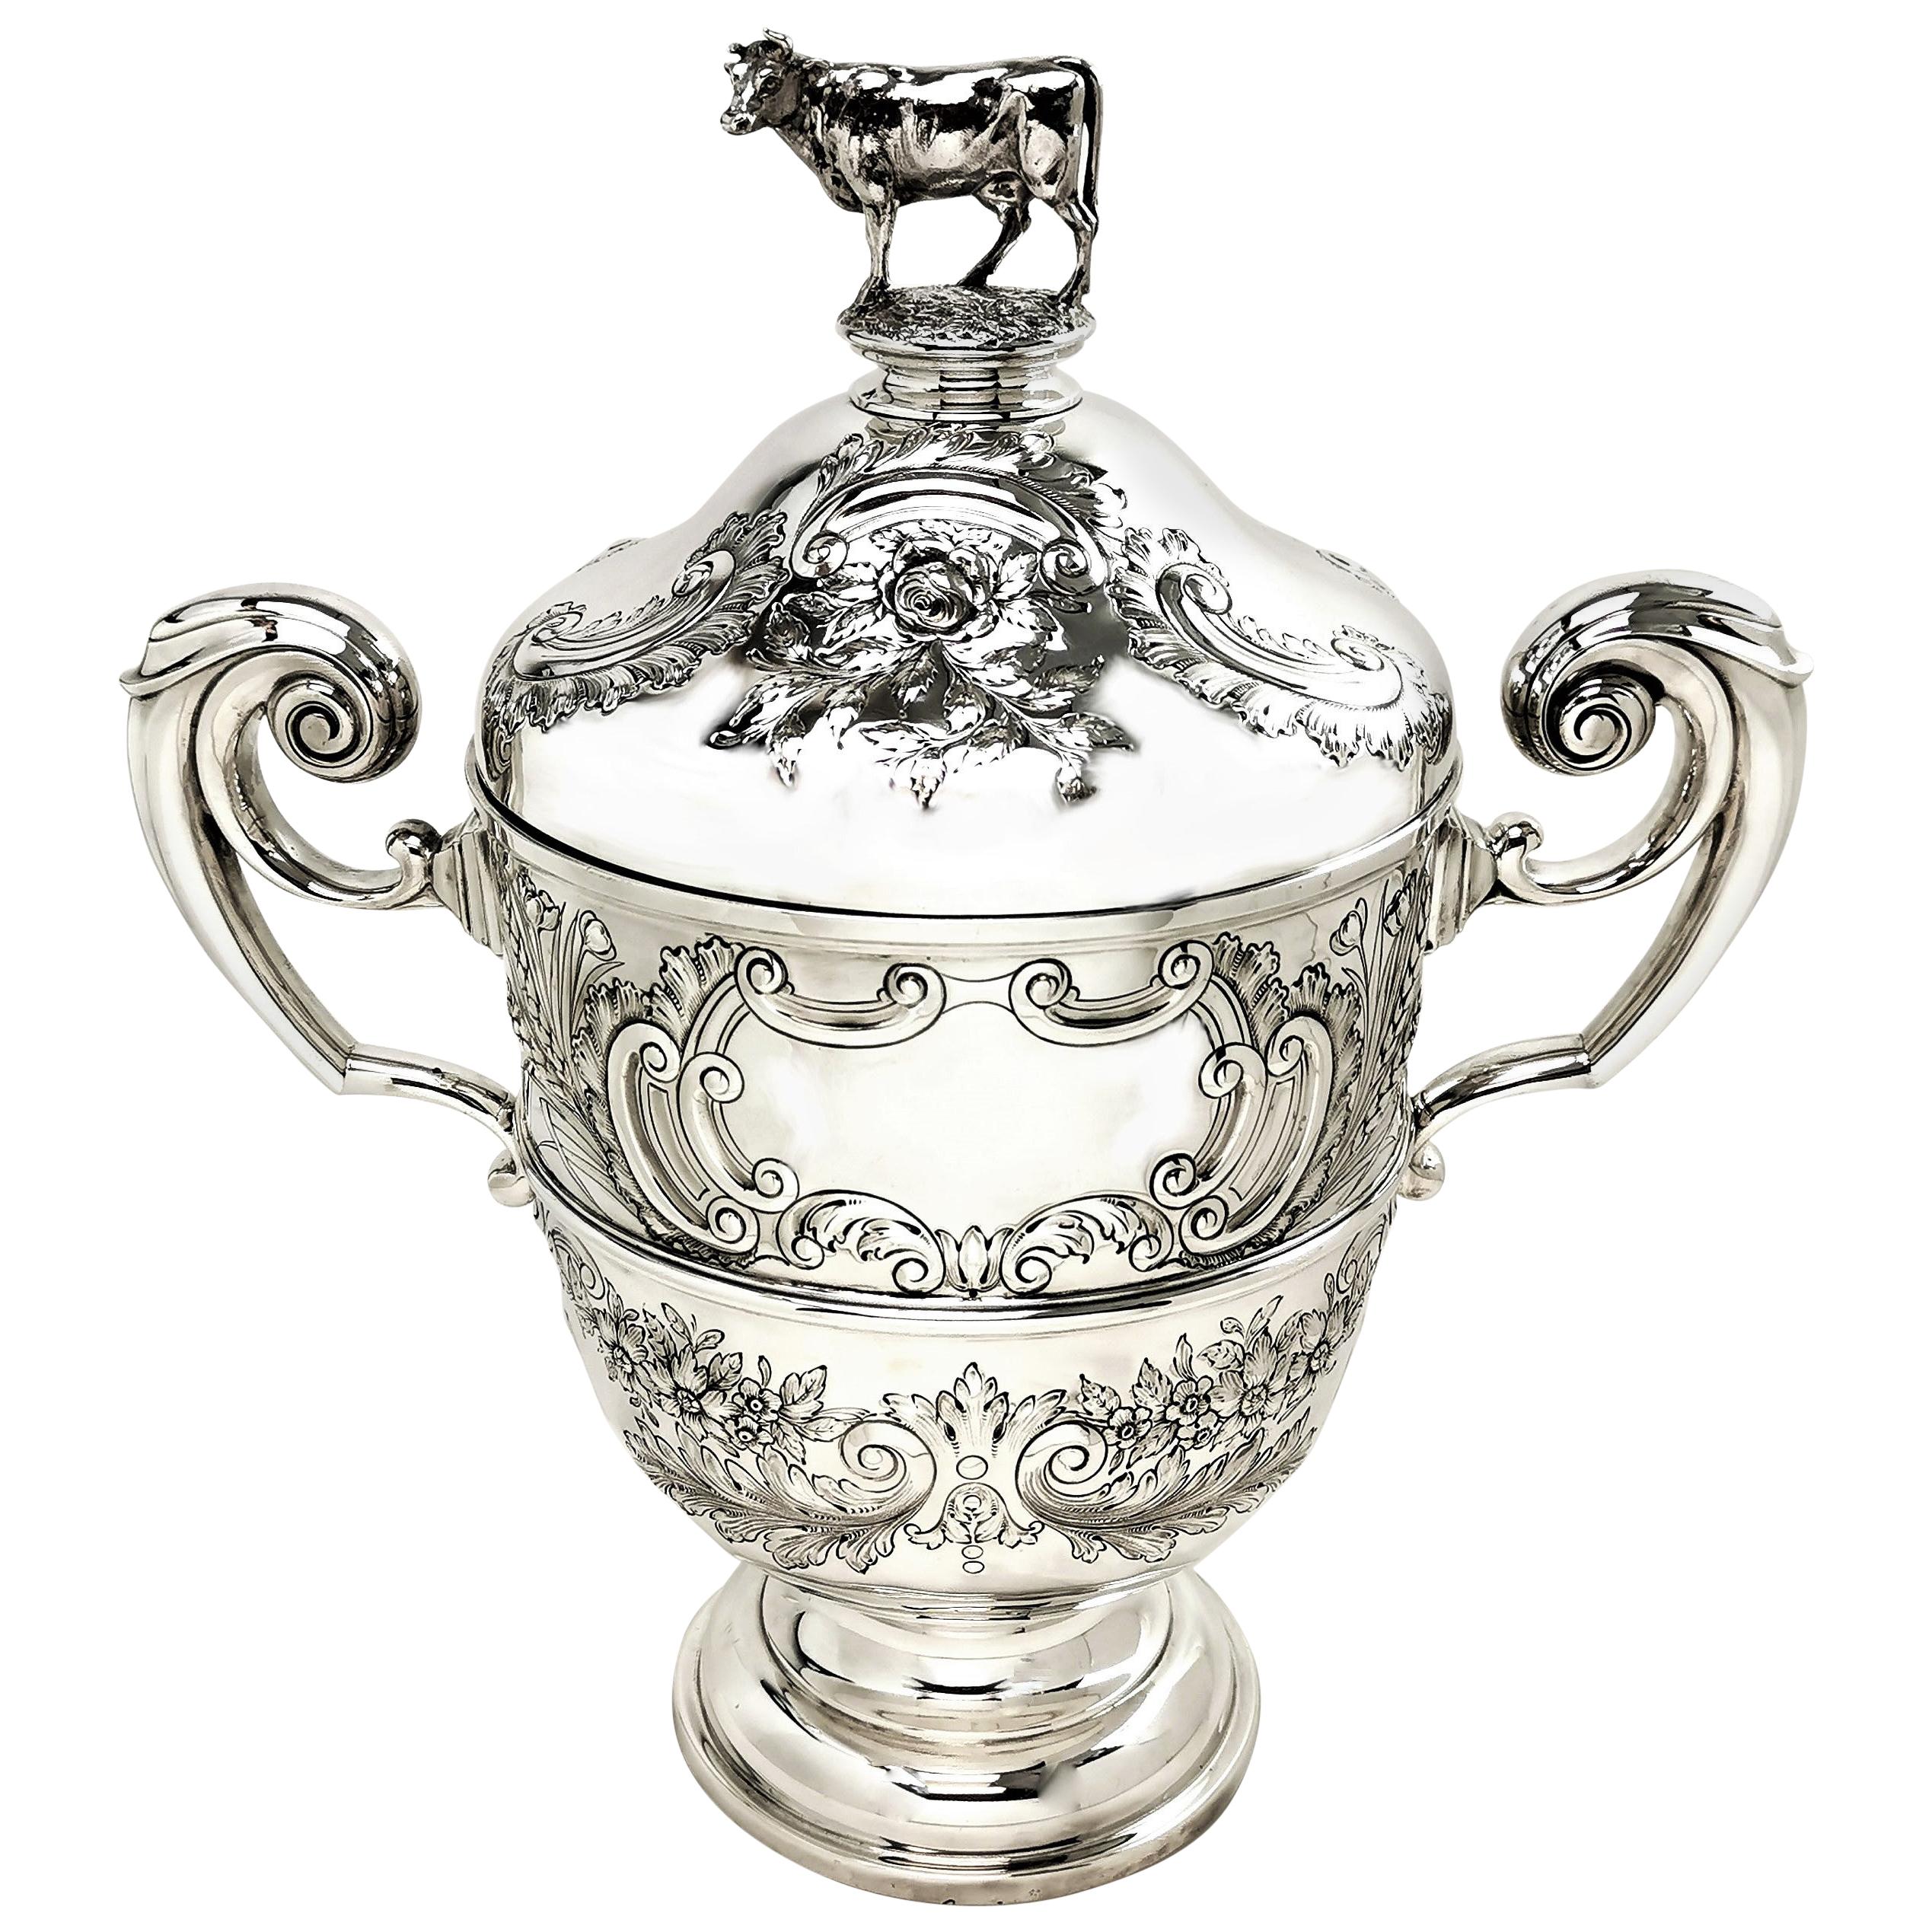 Large Edwardian Antique Silver Trophy Lidded Cup & Cover 1903 Cow